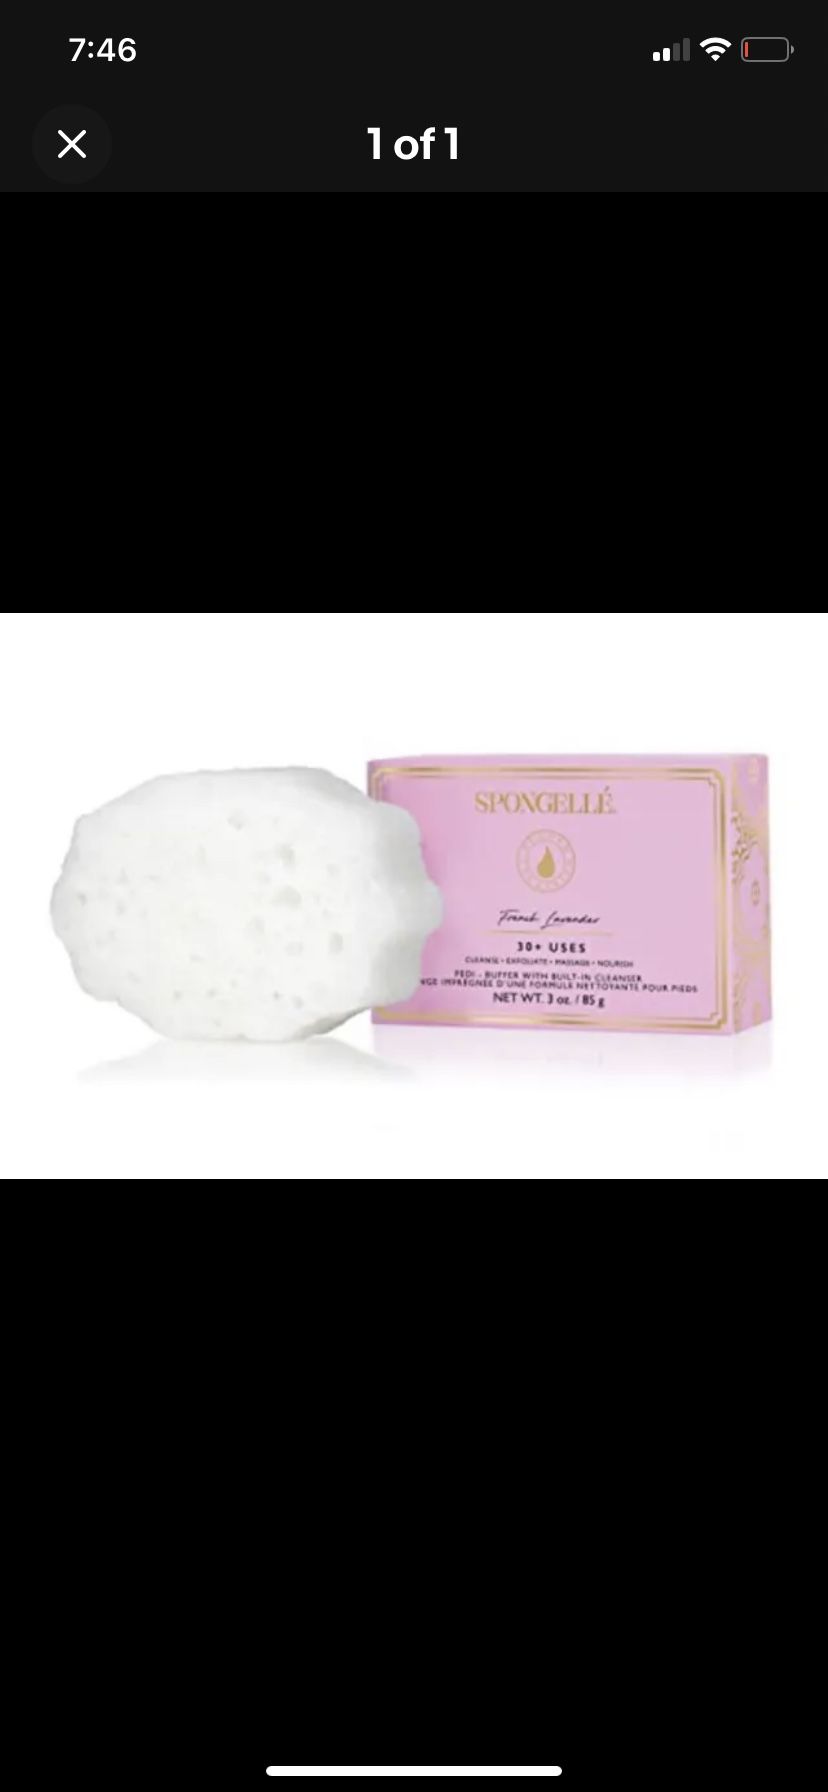 Spongelle Body Wash Infused Pedi Buffer 30+ Washes - French Lavender